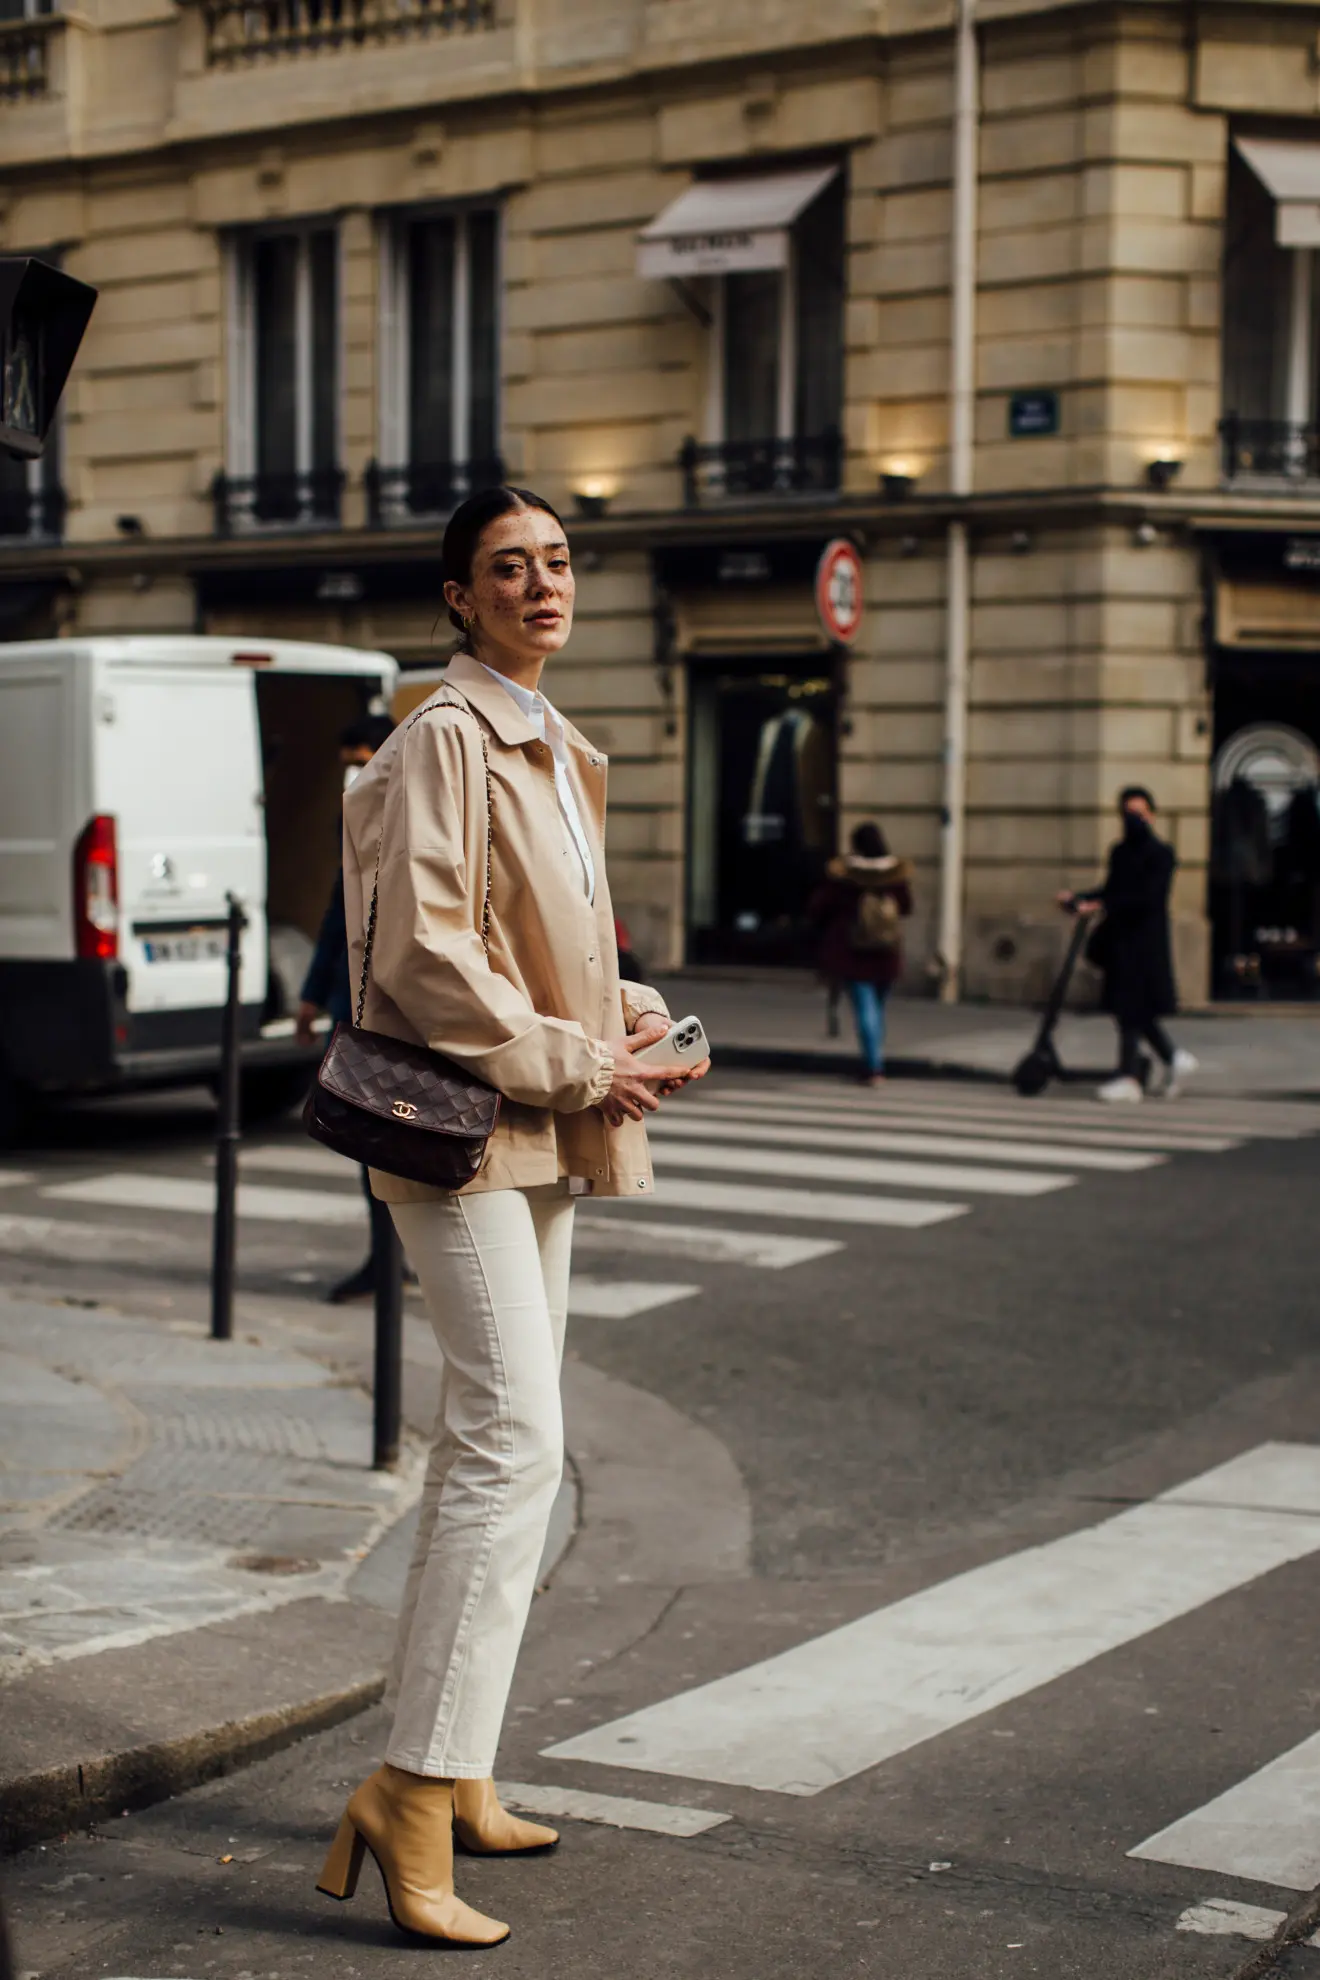 Parisian Style: How To Dress Like A Chic Parisian Woman If You're